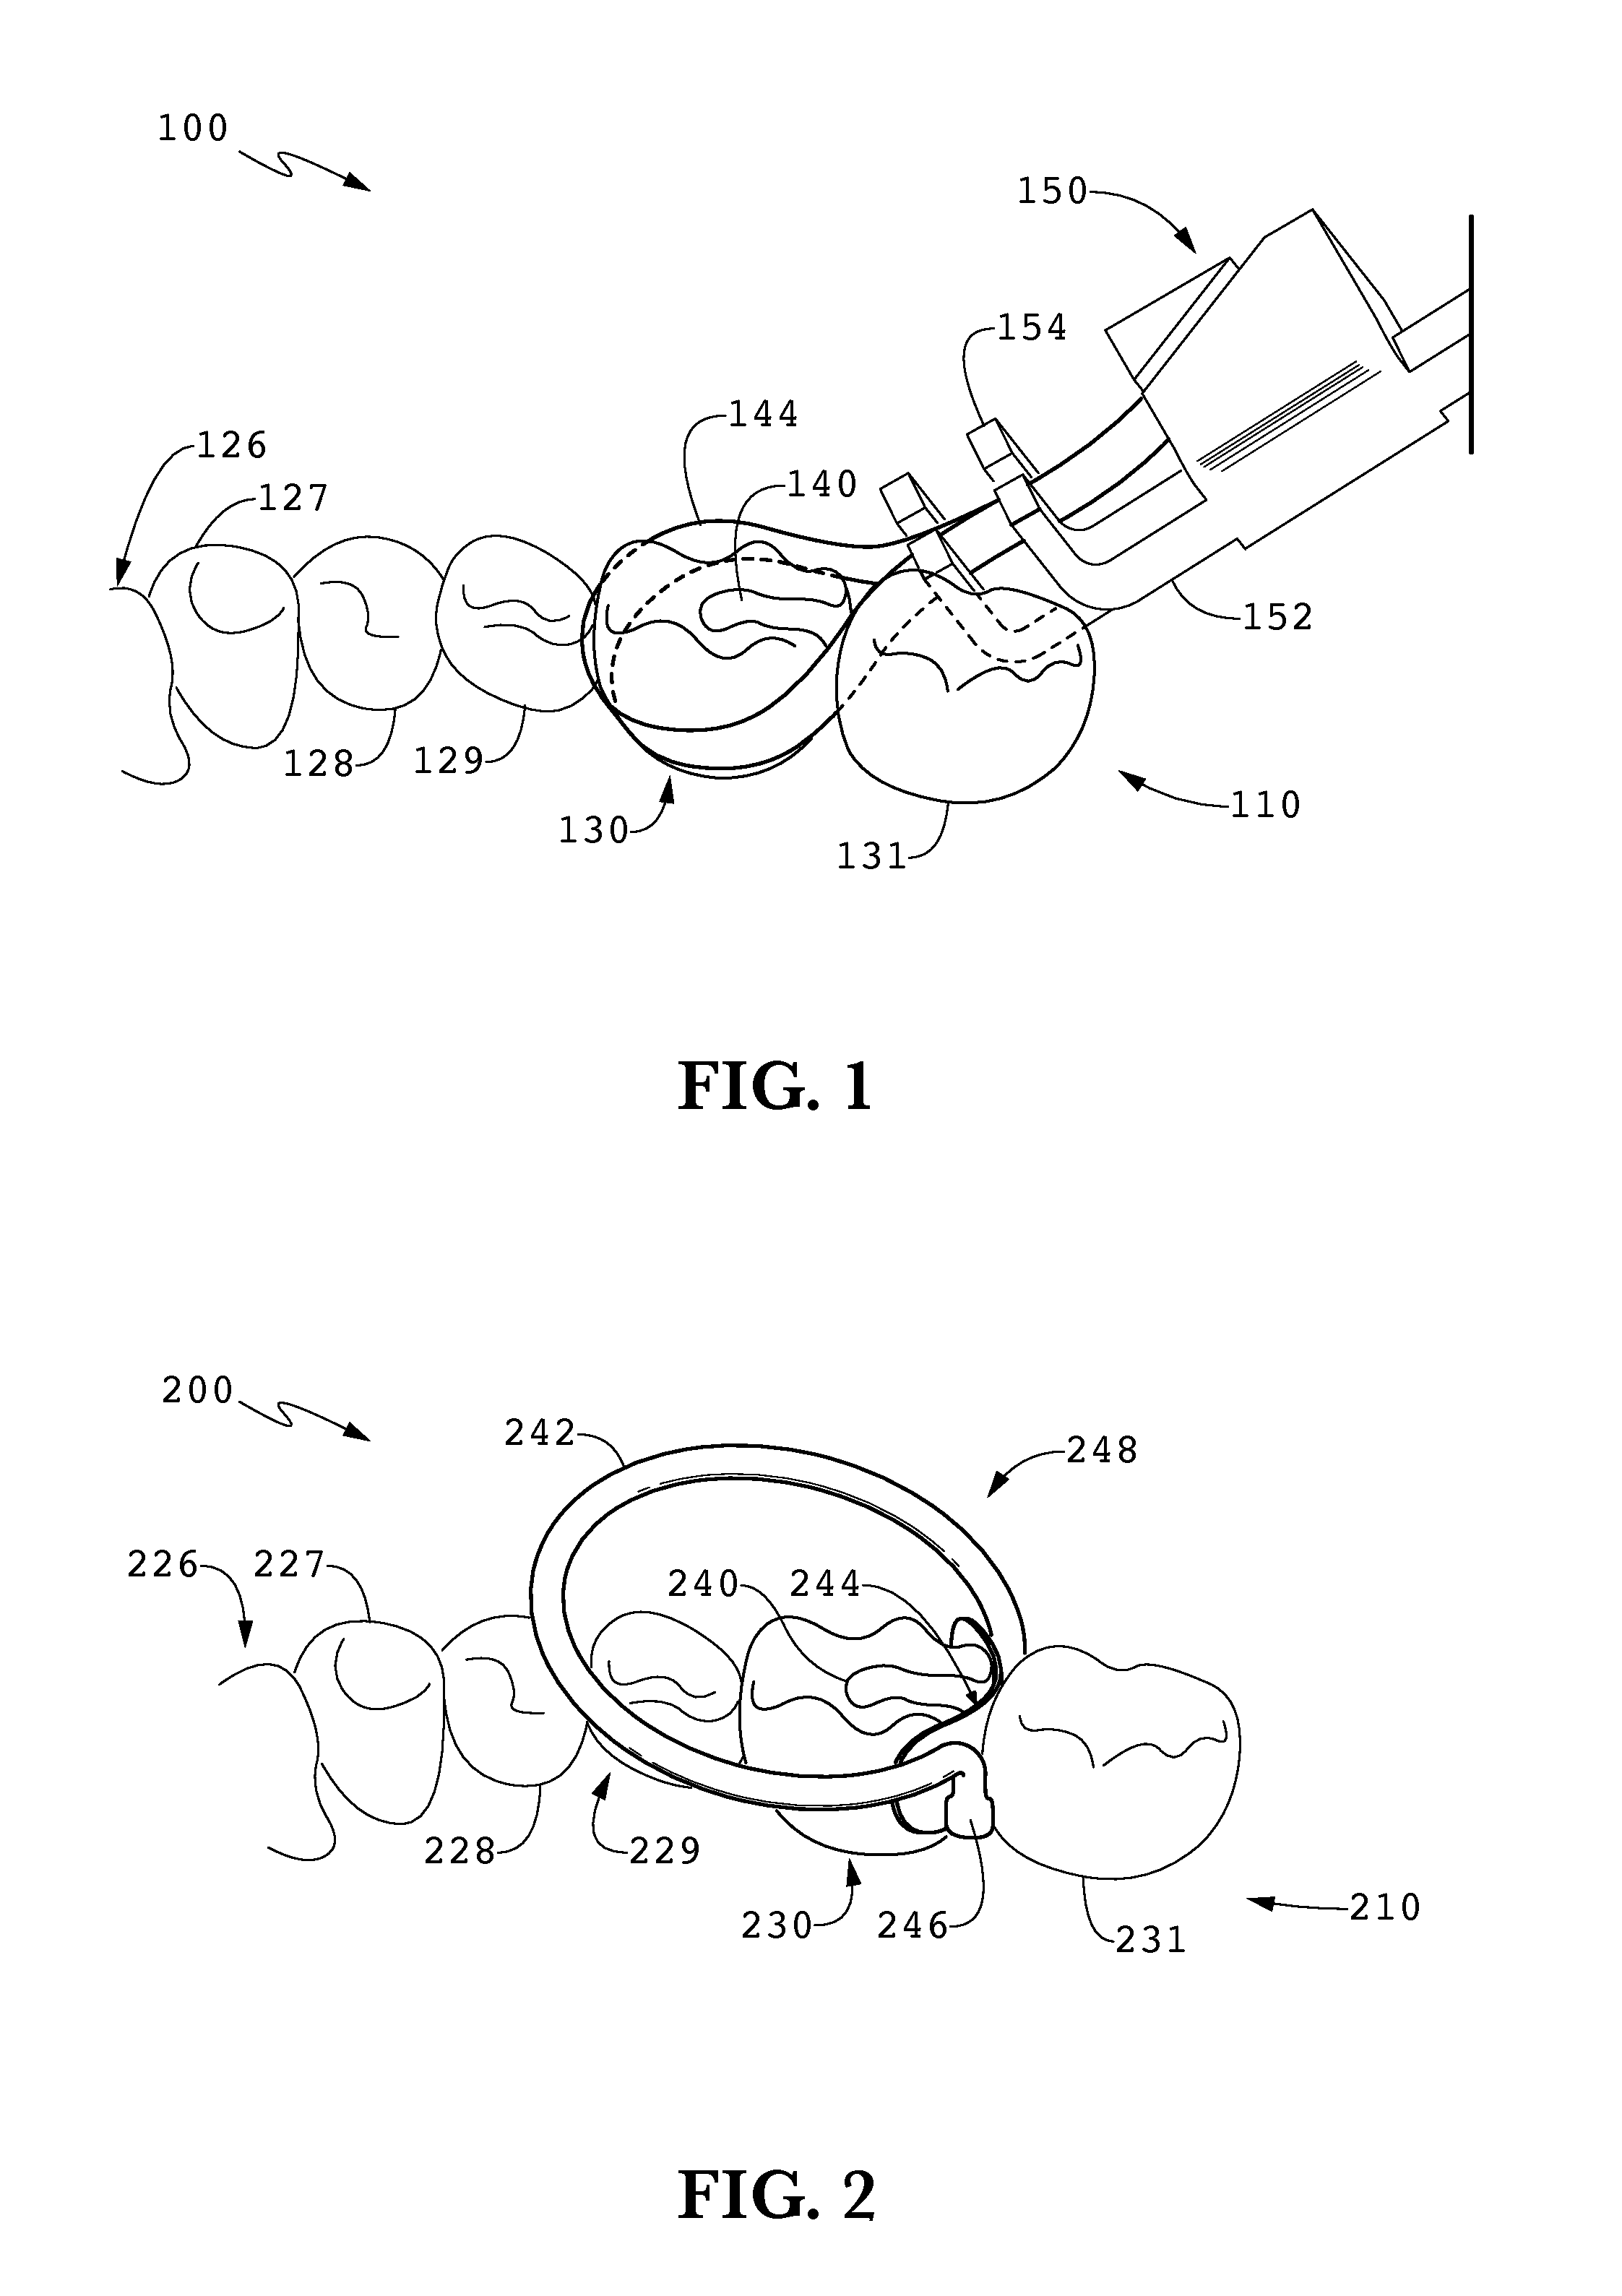 System for Maintaining Tooth Contact During Interproximal Dental Restoration